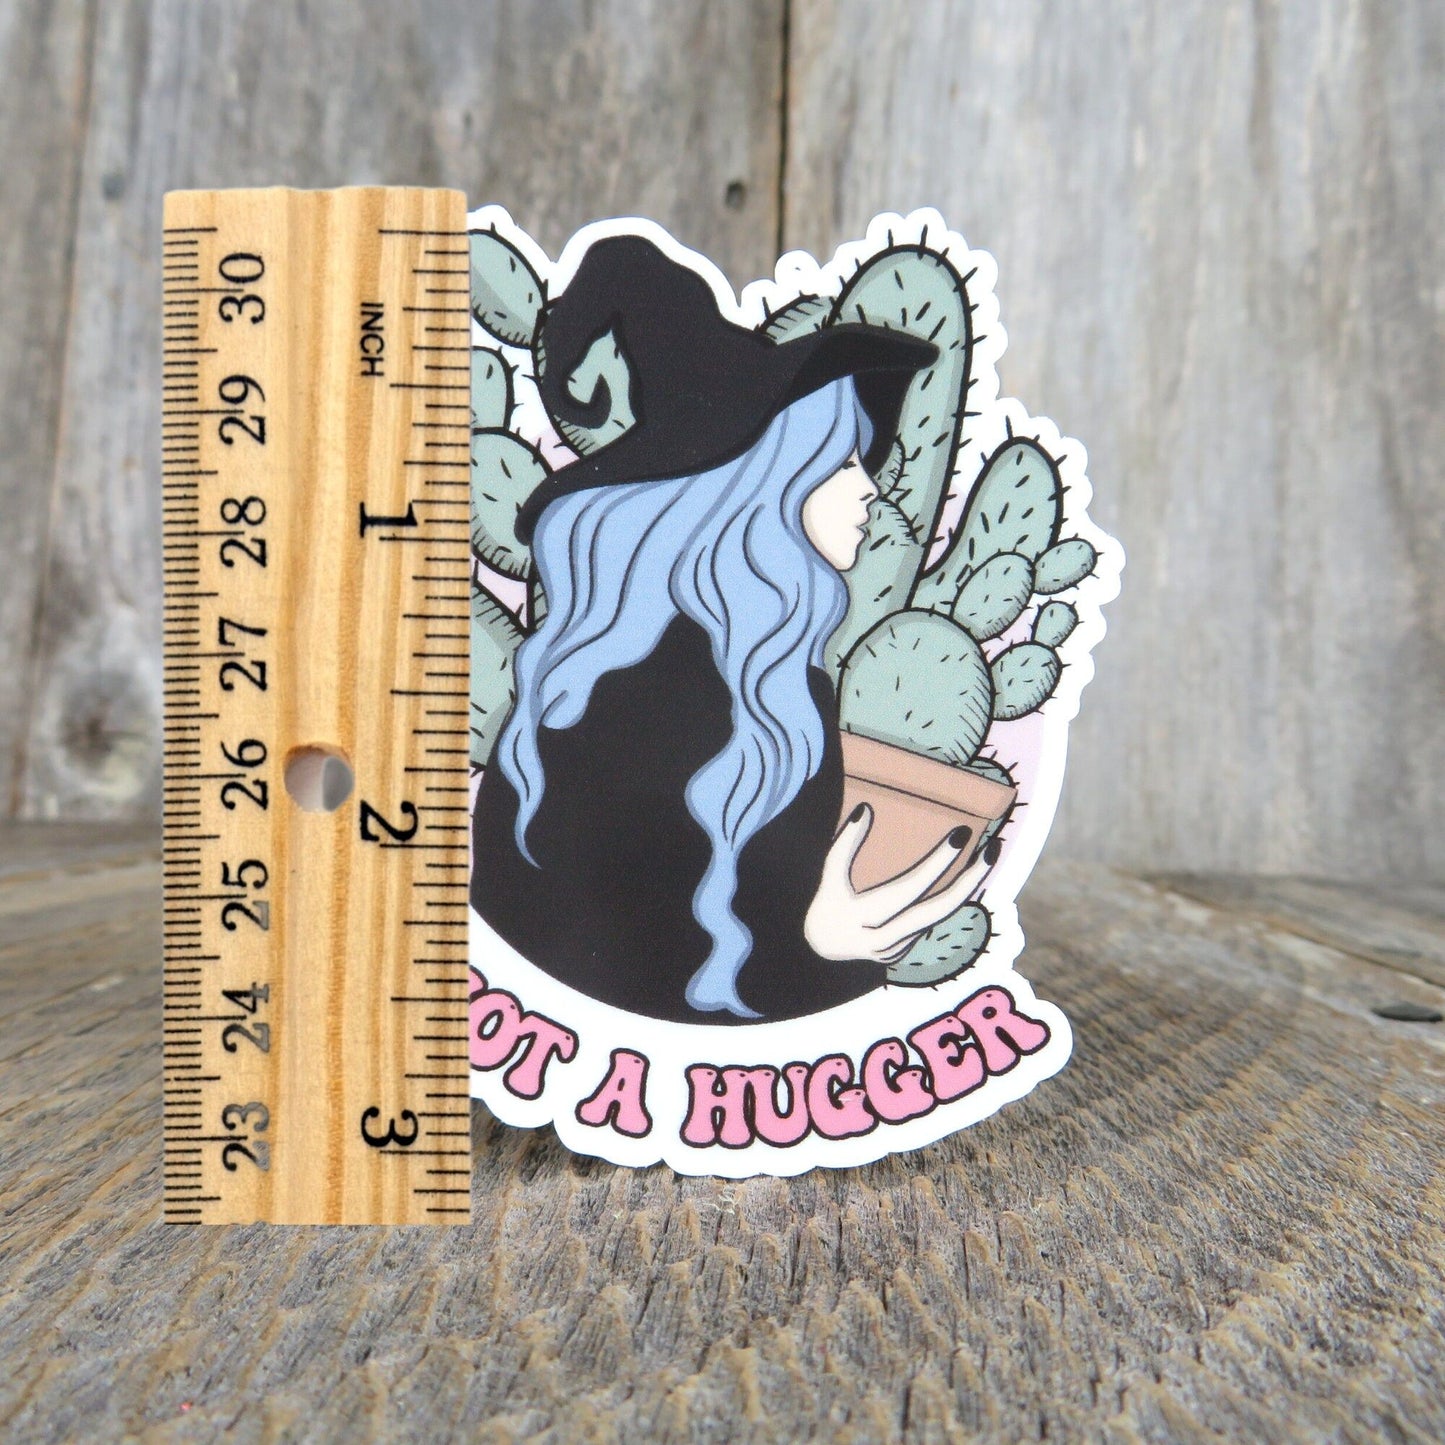 Not a Hugger Sticker Funny Cactus Plant Witch Sarcastic Sayings Plant Lover